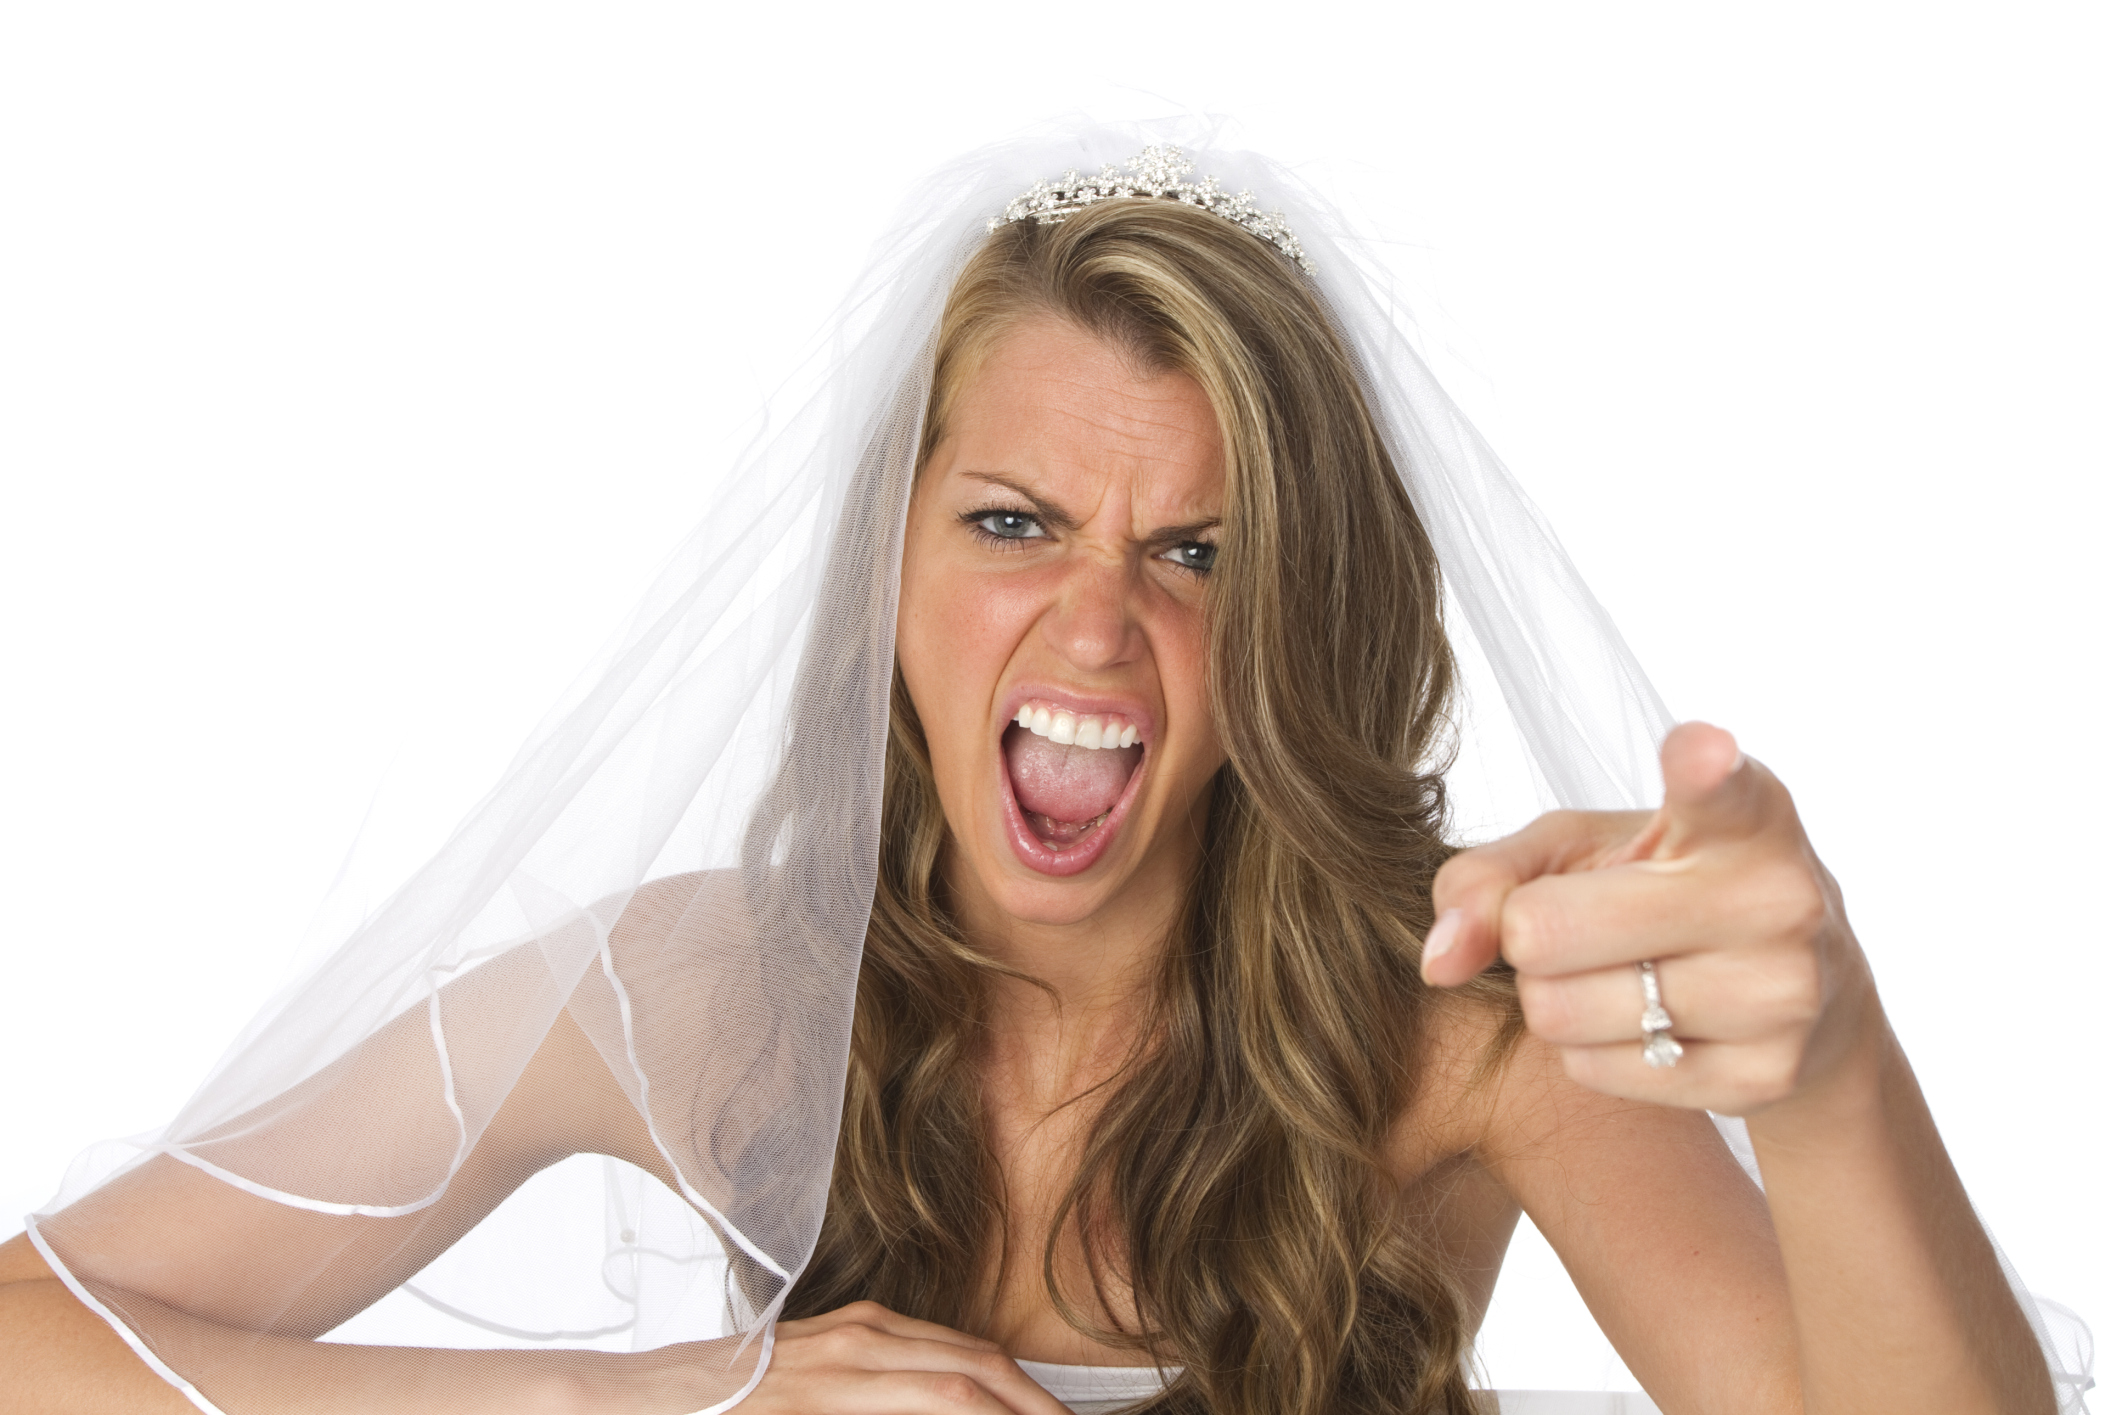 10 signs you're a bridezilla and don't yet know it